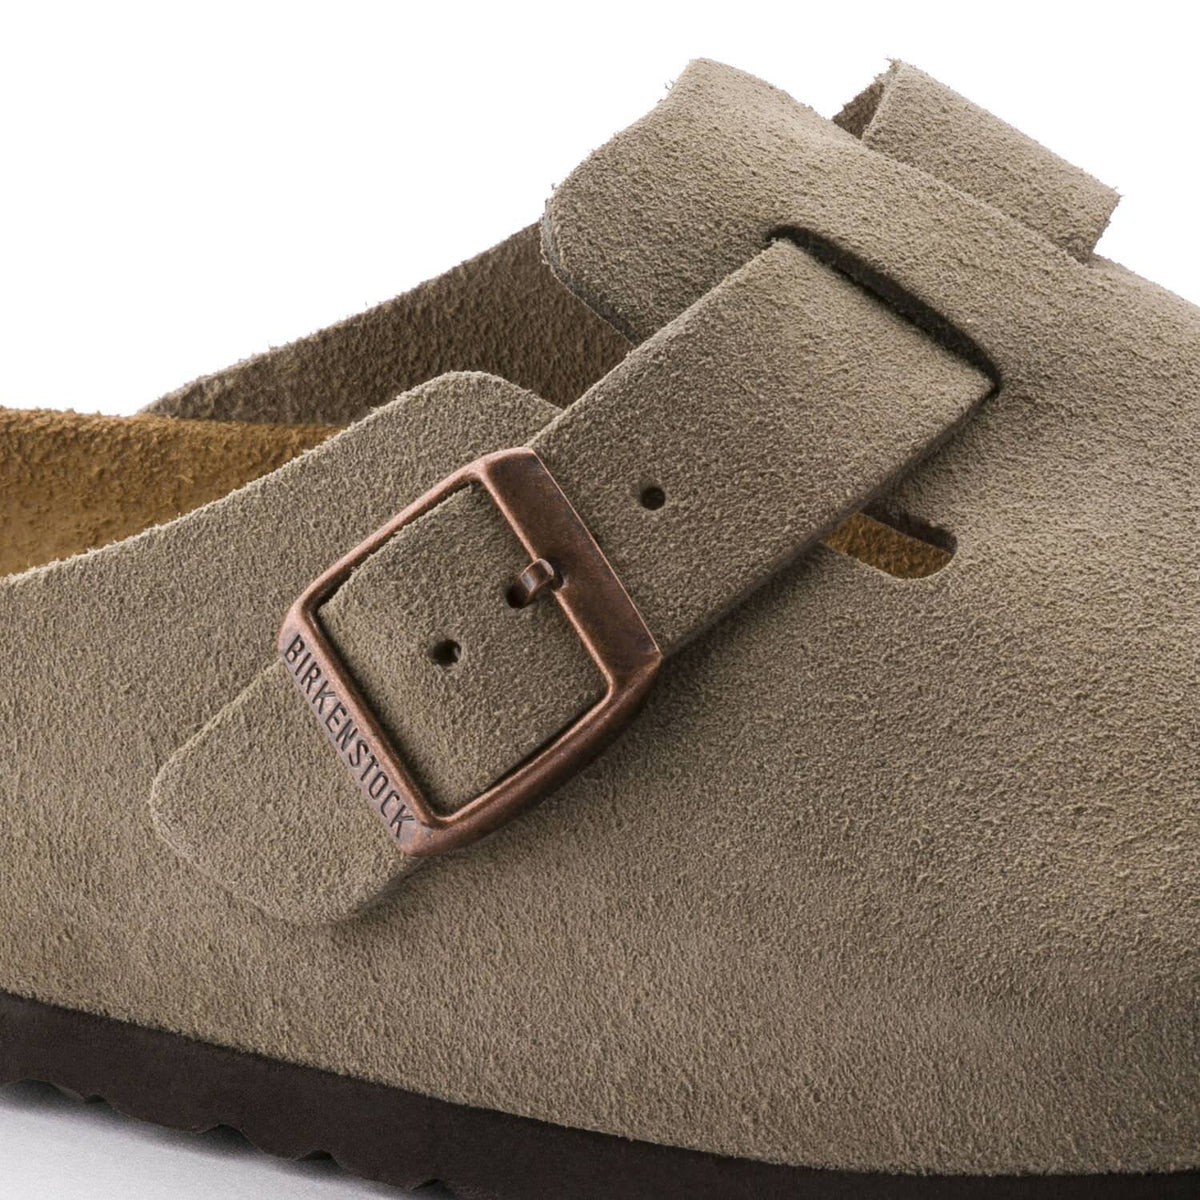 Birkenstock Boston, Narrow Fit, Soft Footbed, Suede Leather, Taupe Clogs Birkenstock Classic 